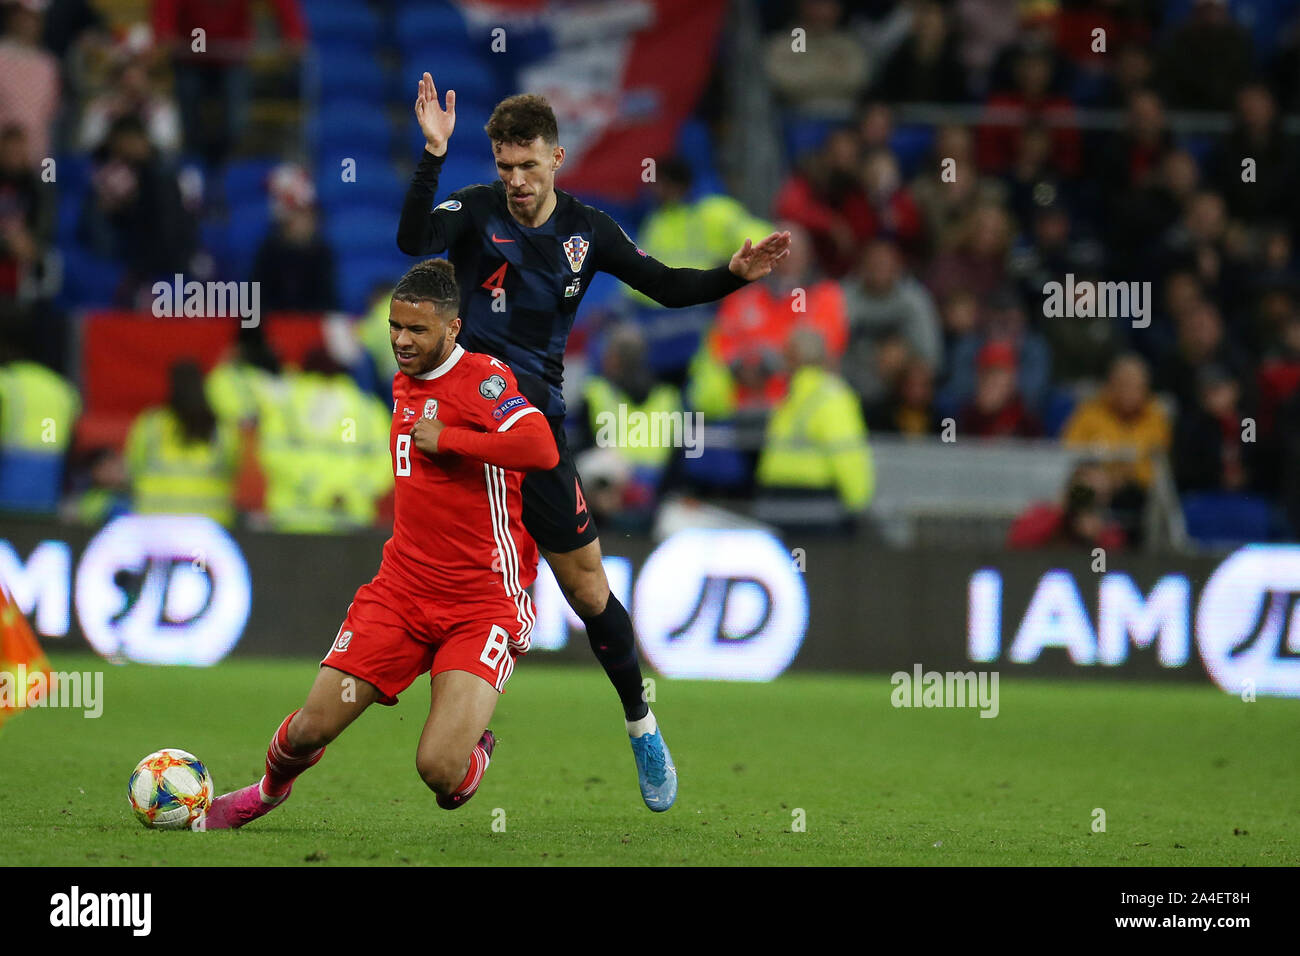 Cardiff, UK. 13th Oct, 2019. Tyler Roberts of Wales is tackled by Ivan Perisic of Croatia.UEFA Euro 2020 qualifier match, Wales v Croatia at the Cardiff city Stadium in Cardiff, South Wales on Sunday 13th October 2019. pic by Andrew Orchard /Andrew Orchard sports photography/Alamy live News EDITORIAL USE ONLY Credit: Andrew Orchard sports photography/Alamy Live News Stock Photo